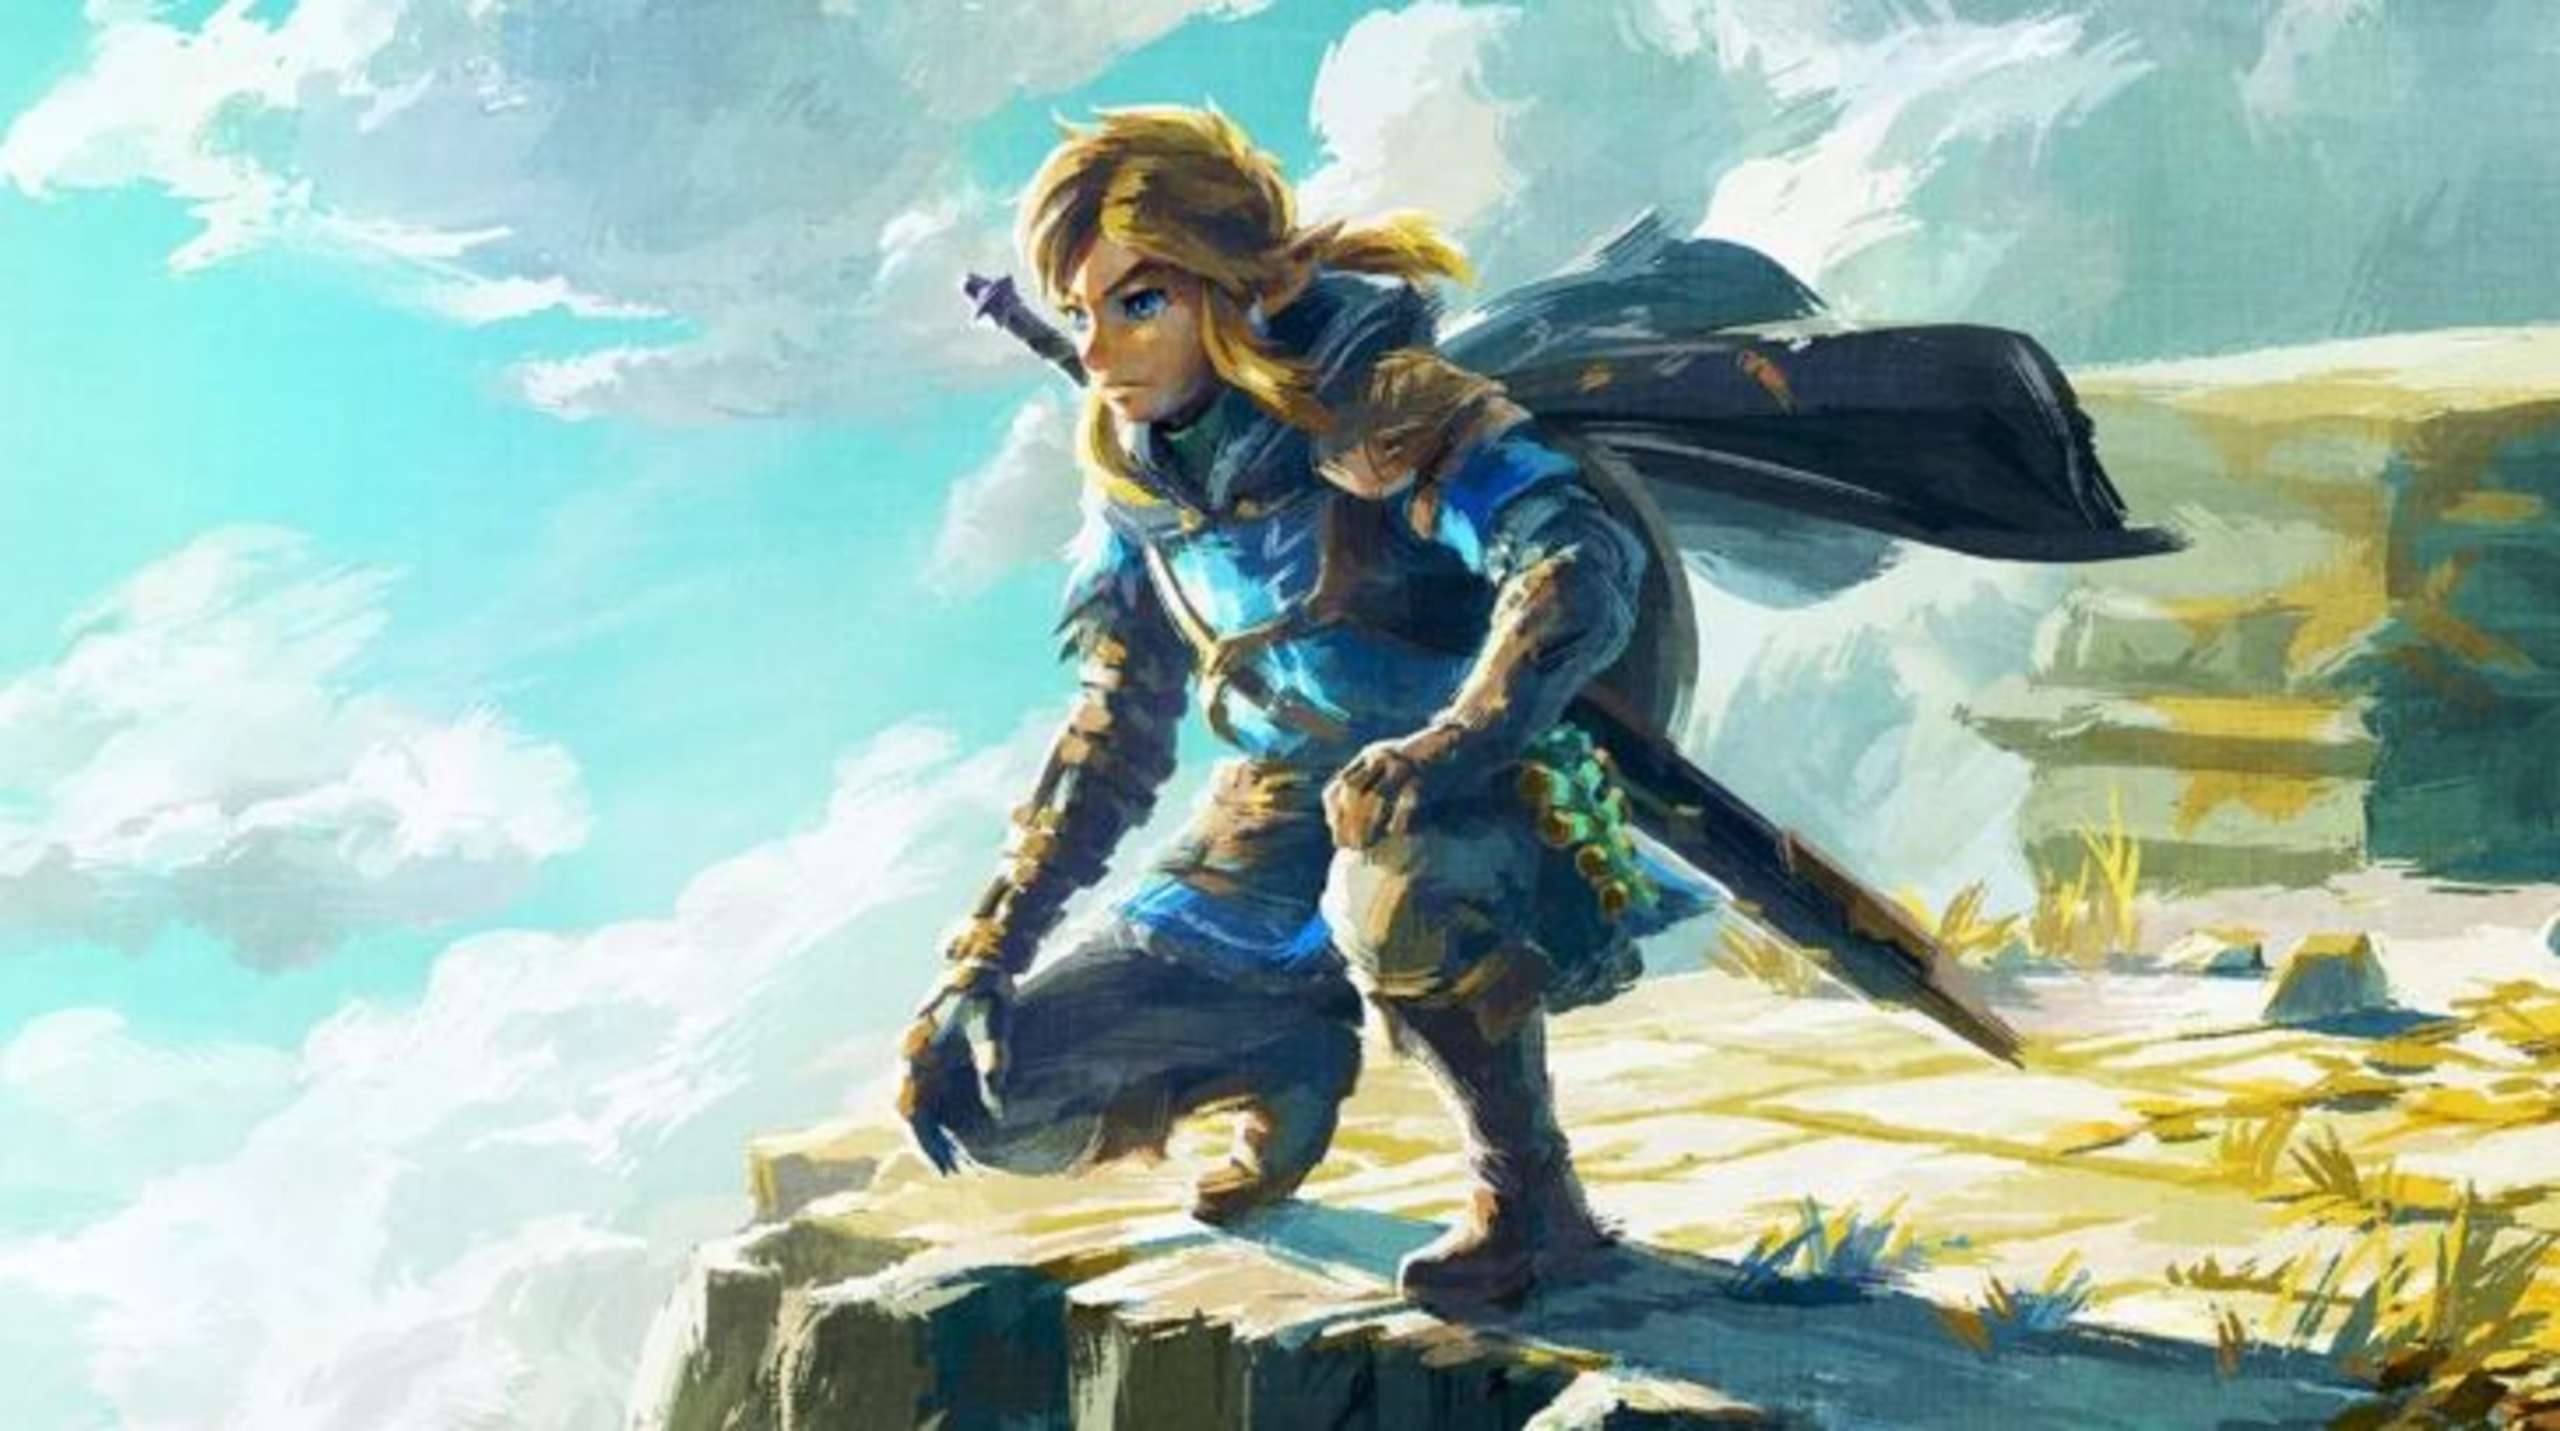 The Ritos Of Hyrule Is Given A Chance In The Legend Of Zelda: Tears Of The Kingdom Thanks To The Game’s Focus On Flight And Floating Platforms, Which Provide A Means Of Evading The Destruction Of The Dark World